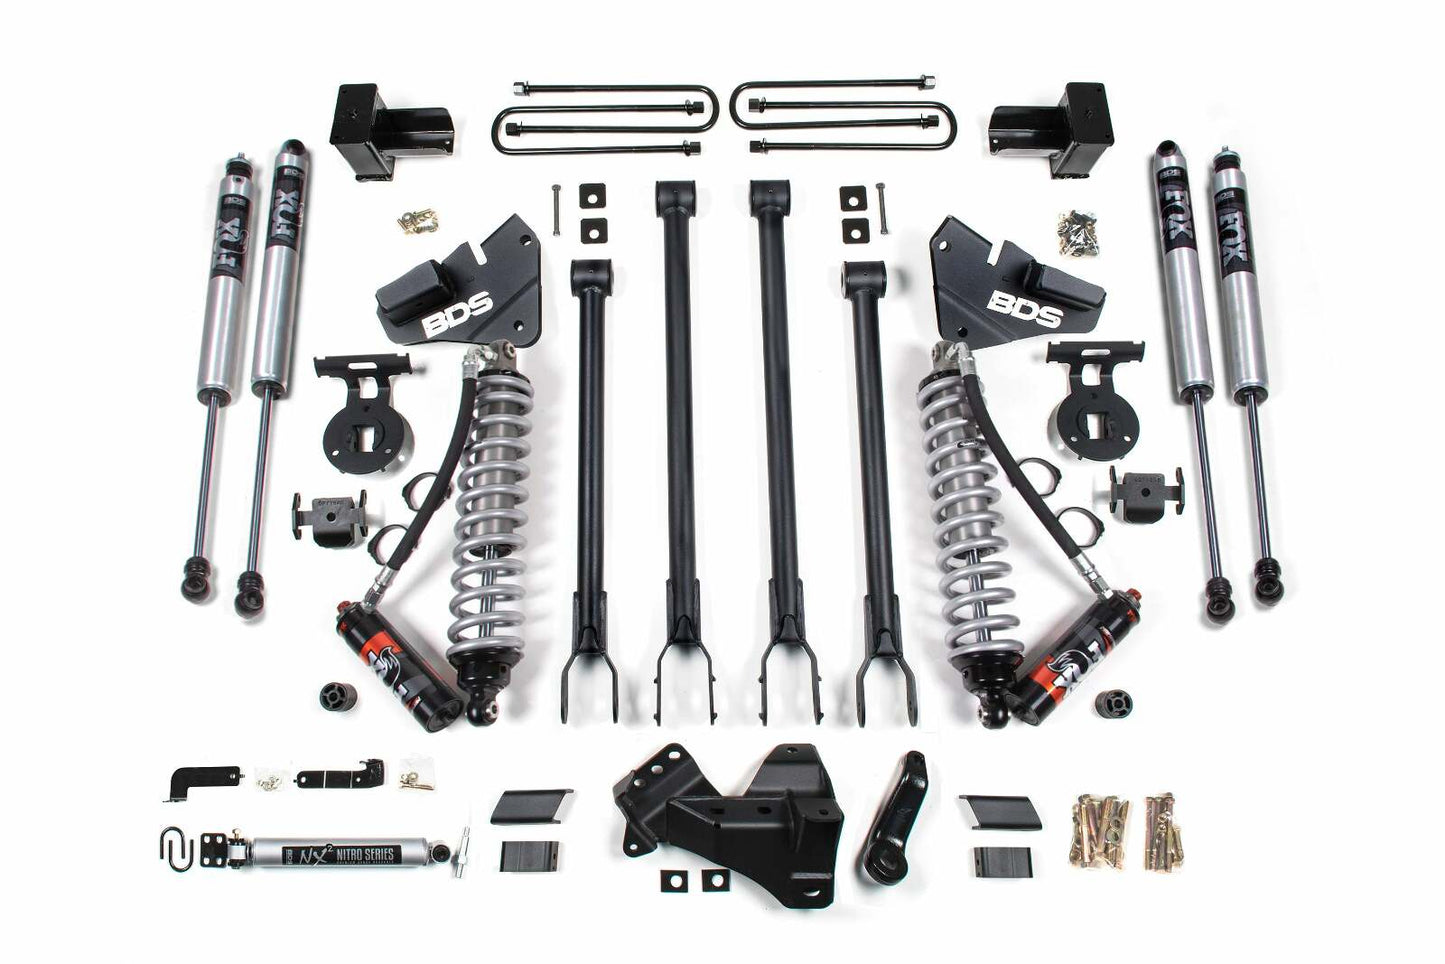 2017-2019 Ford F250/F350 4wd 4" 4-Link Suspension Lift Kit, 3" Rear, Spring, Diesel - Fox 2.5 PES C/O Front, Fox 2.0 IFP PS Aux Front, Fox 2.0 IFP PS Rear